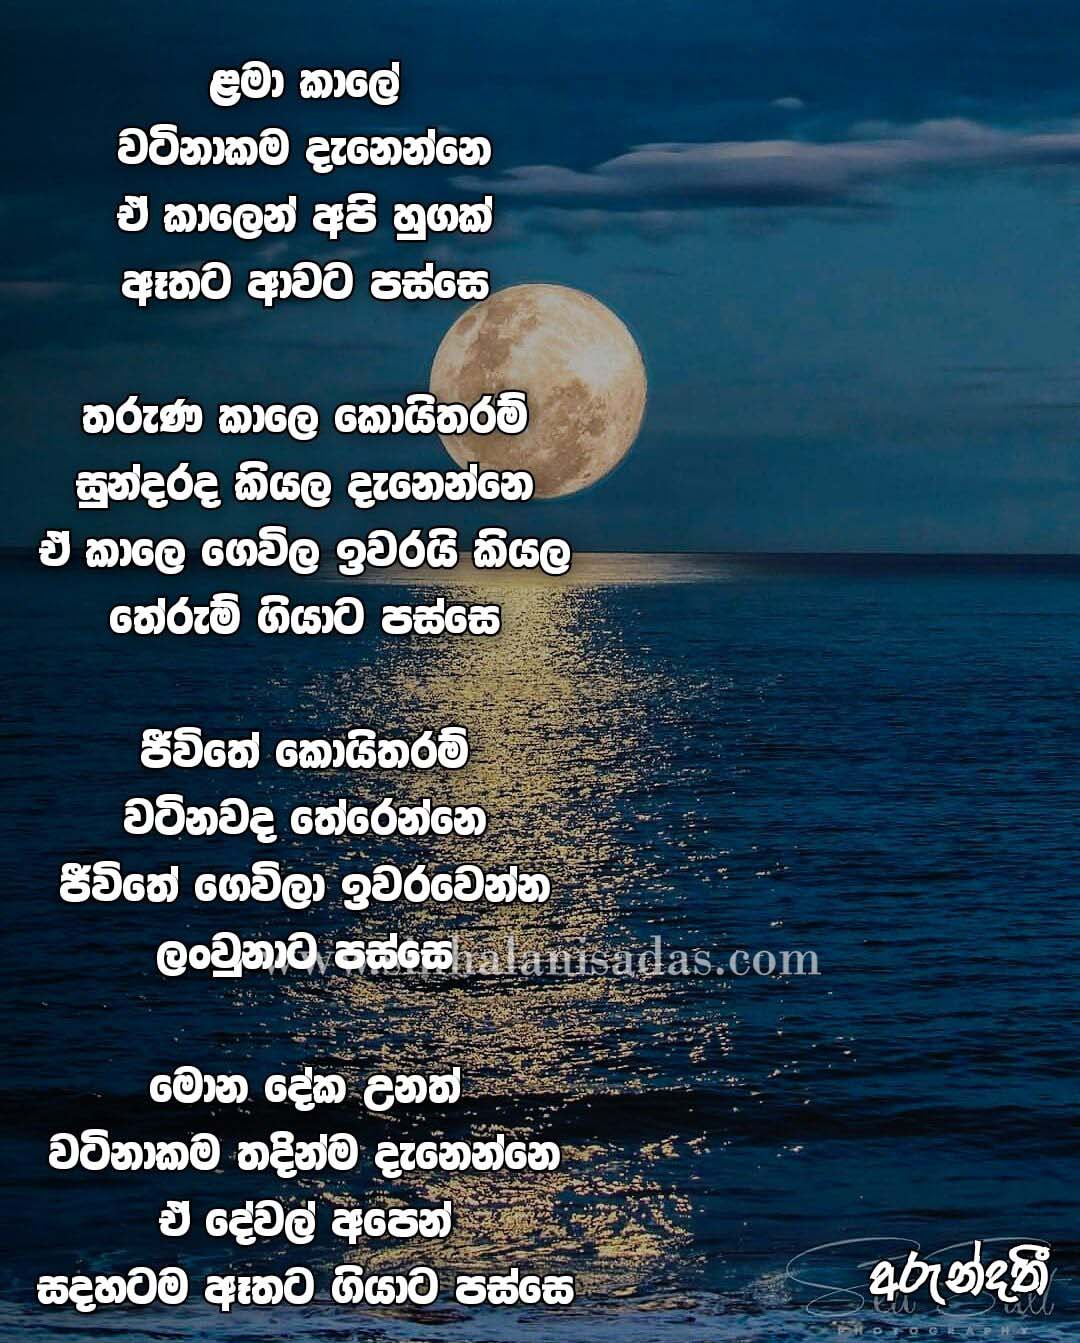 Sinhala Poems About Life